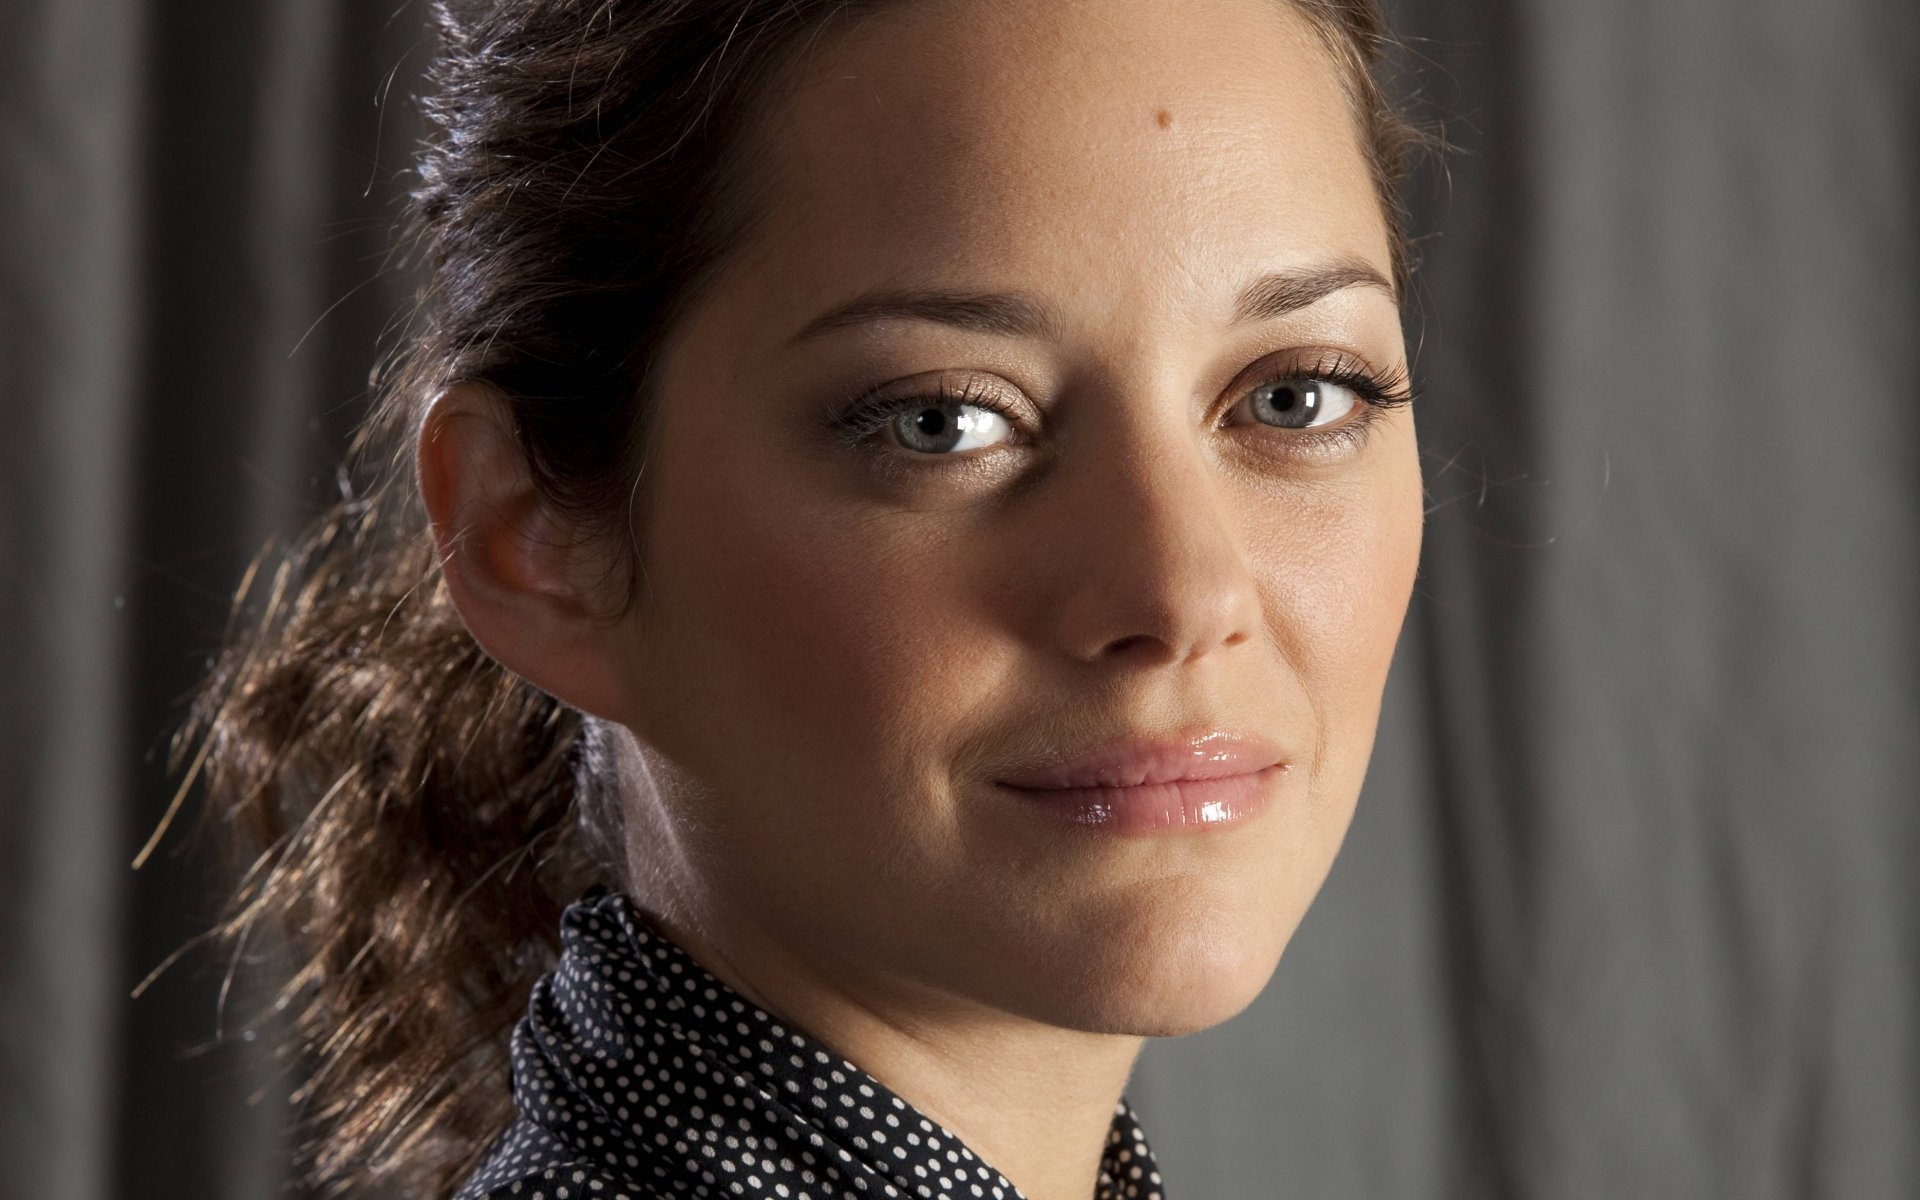 Marion Cotillard Movies, Stunning wallpapers, French beauty, Hollywood star, 1920x1200 HD Desktop